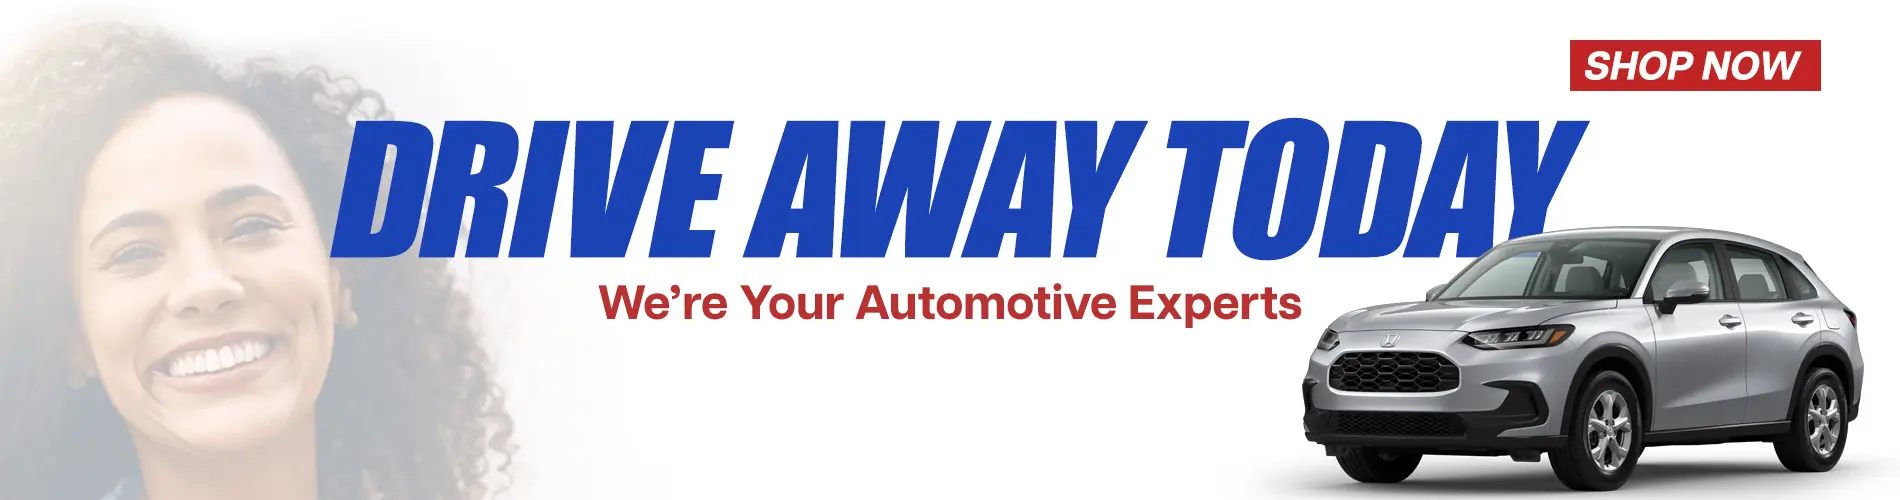 Drive away today - We're your automotive experts - shop now